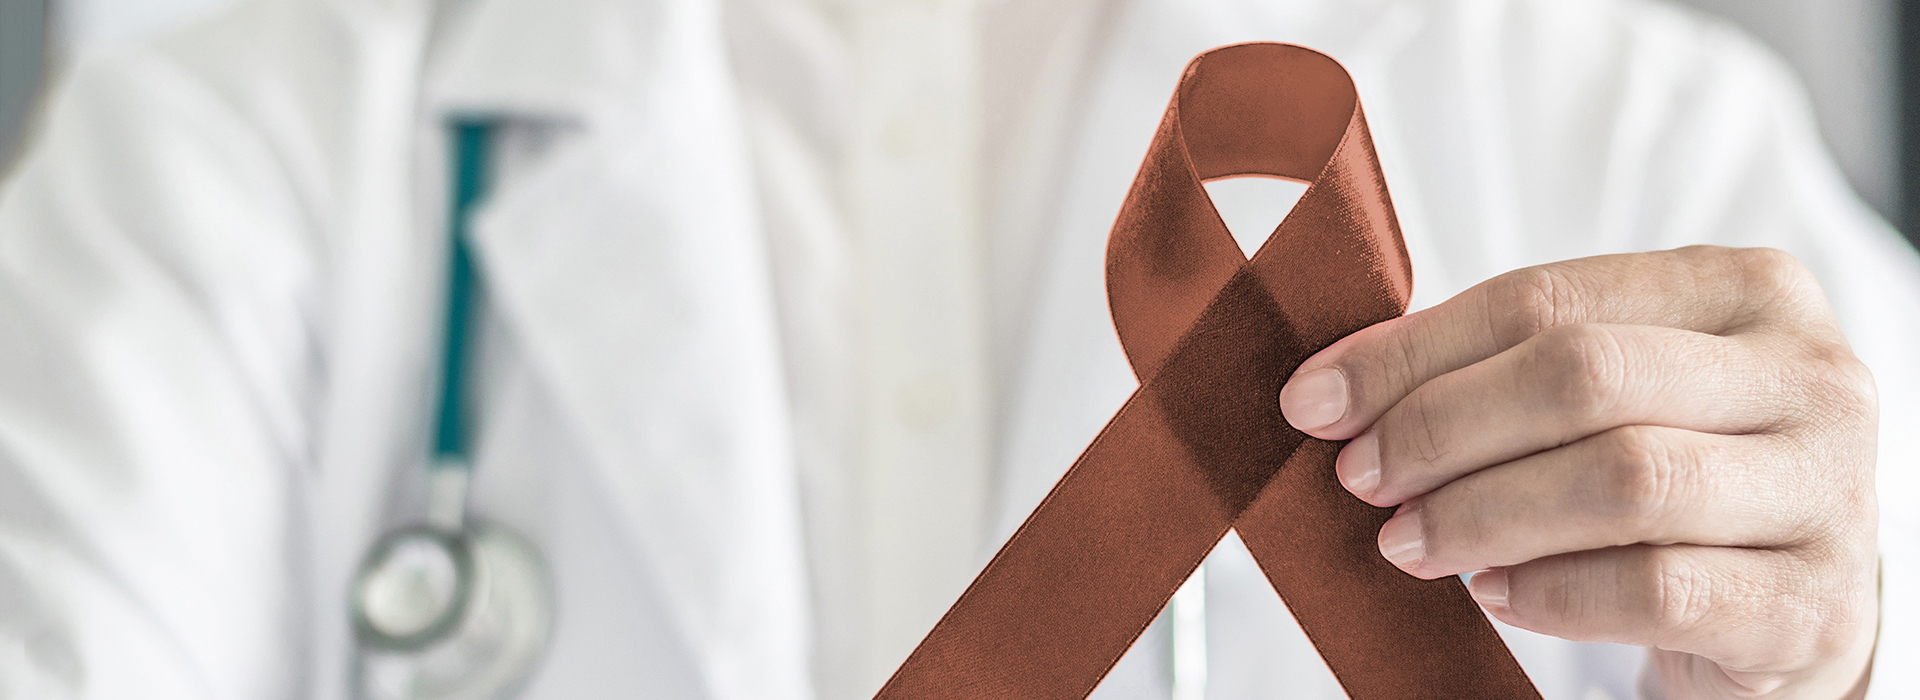 The image shows a medical professional holding a red ribbon, which is commonly associated with awareness for various health causes.